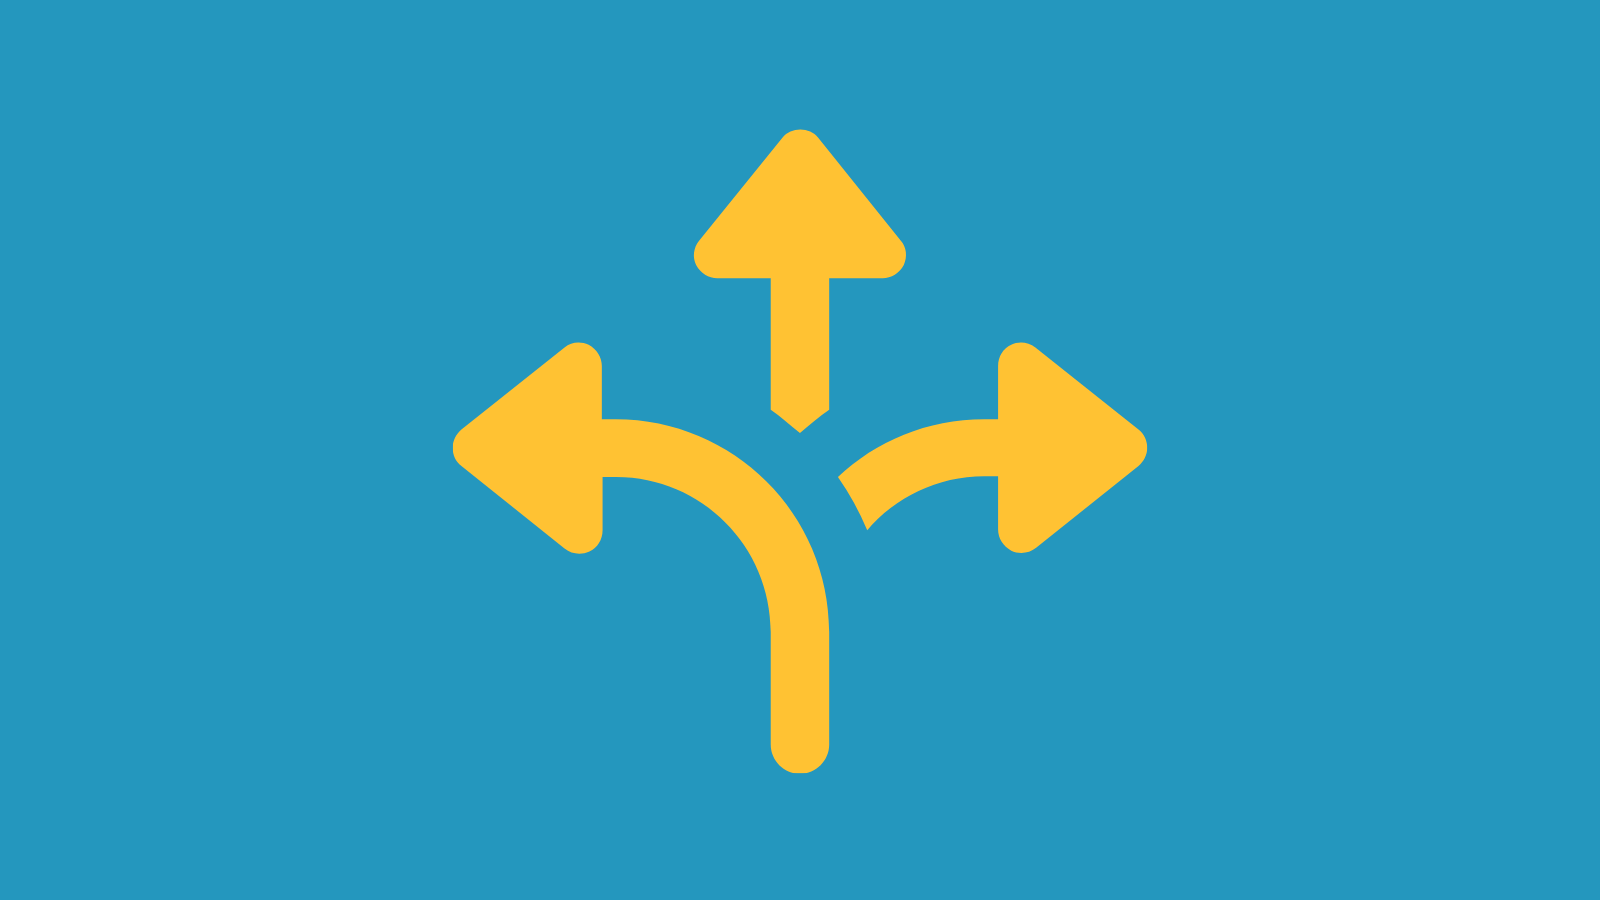 An arrow branching off in three directions